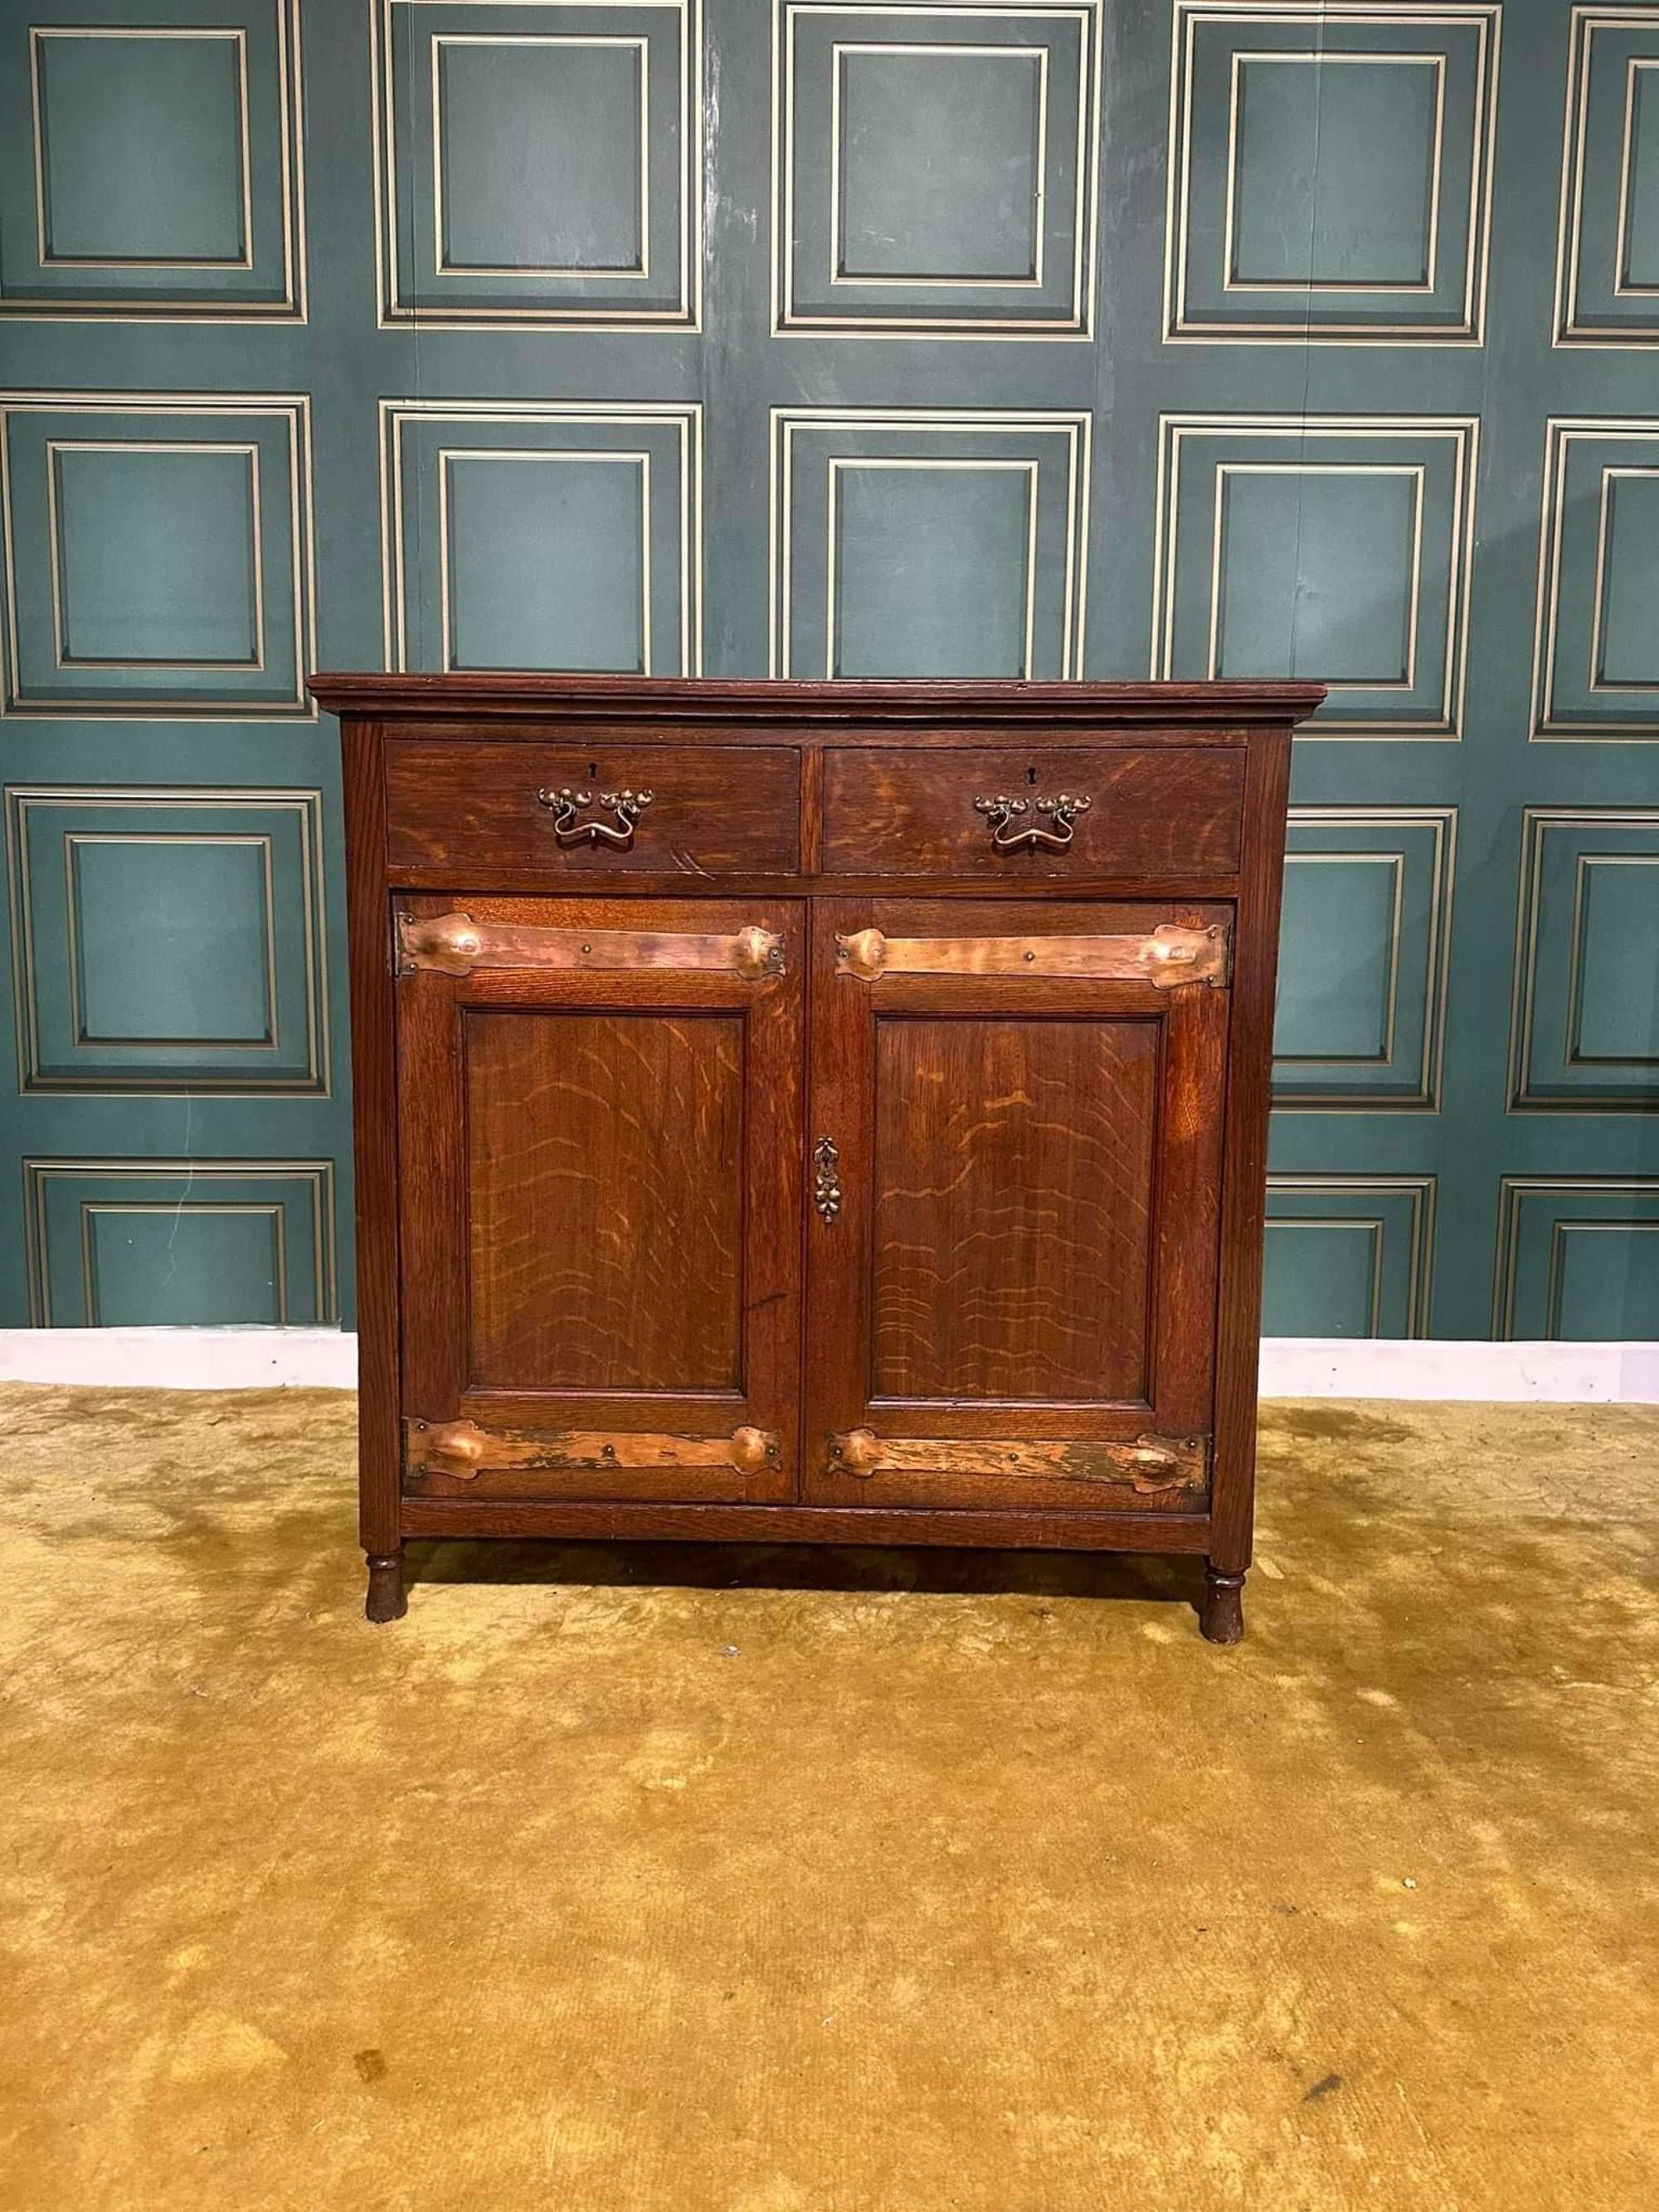 Arts & Crafts Cabinet Having Two Drawers With Very Decorative Copper Handles